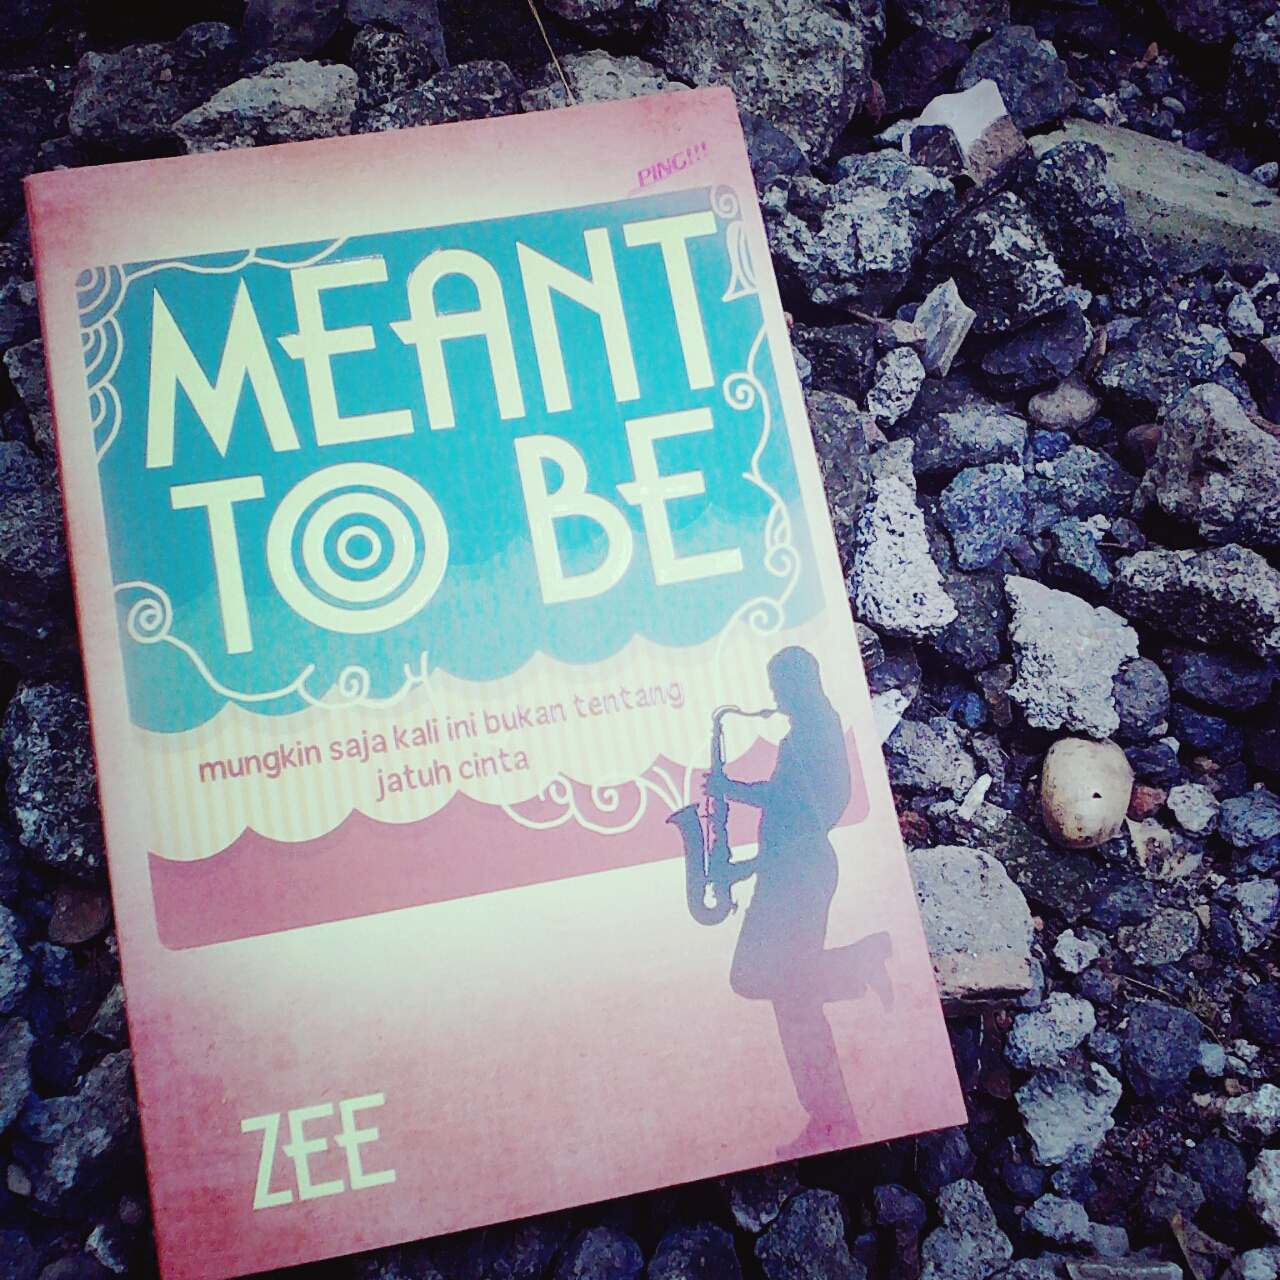 Just got something. Meant to be book.